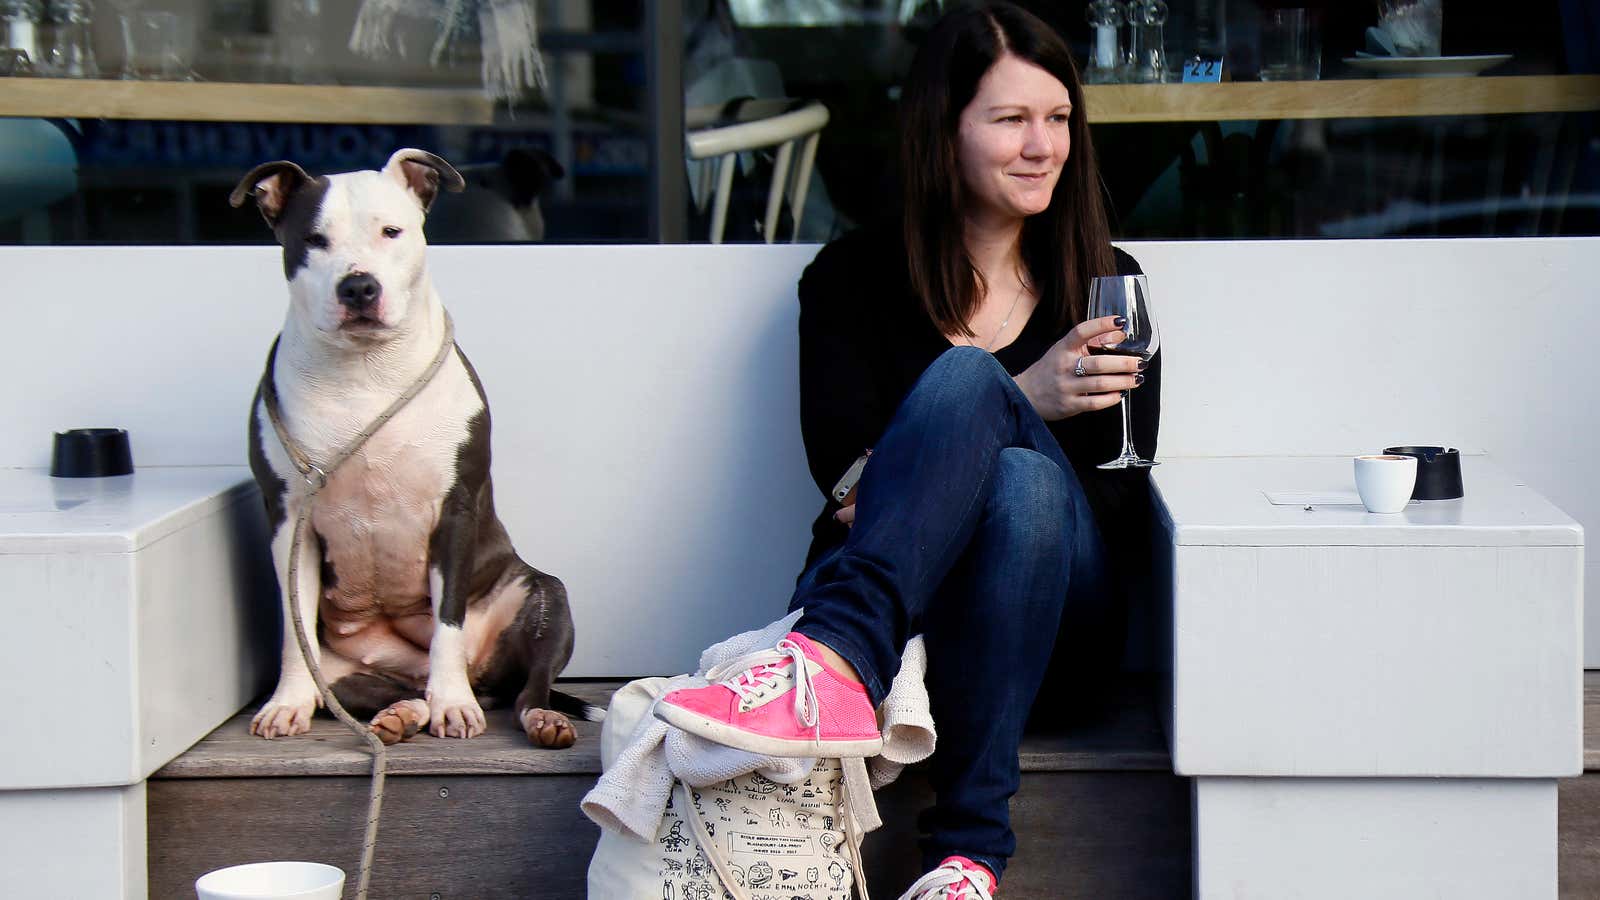 Emilie Liger, from Biarritz, drinks a glass of red wine accompanied by her dog Lara at the terrace of a restaurant in Biarritz, southwestern France,